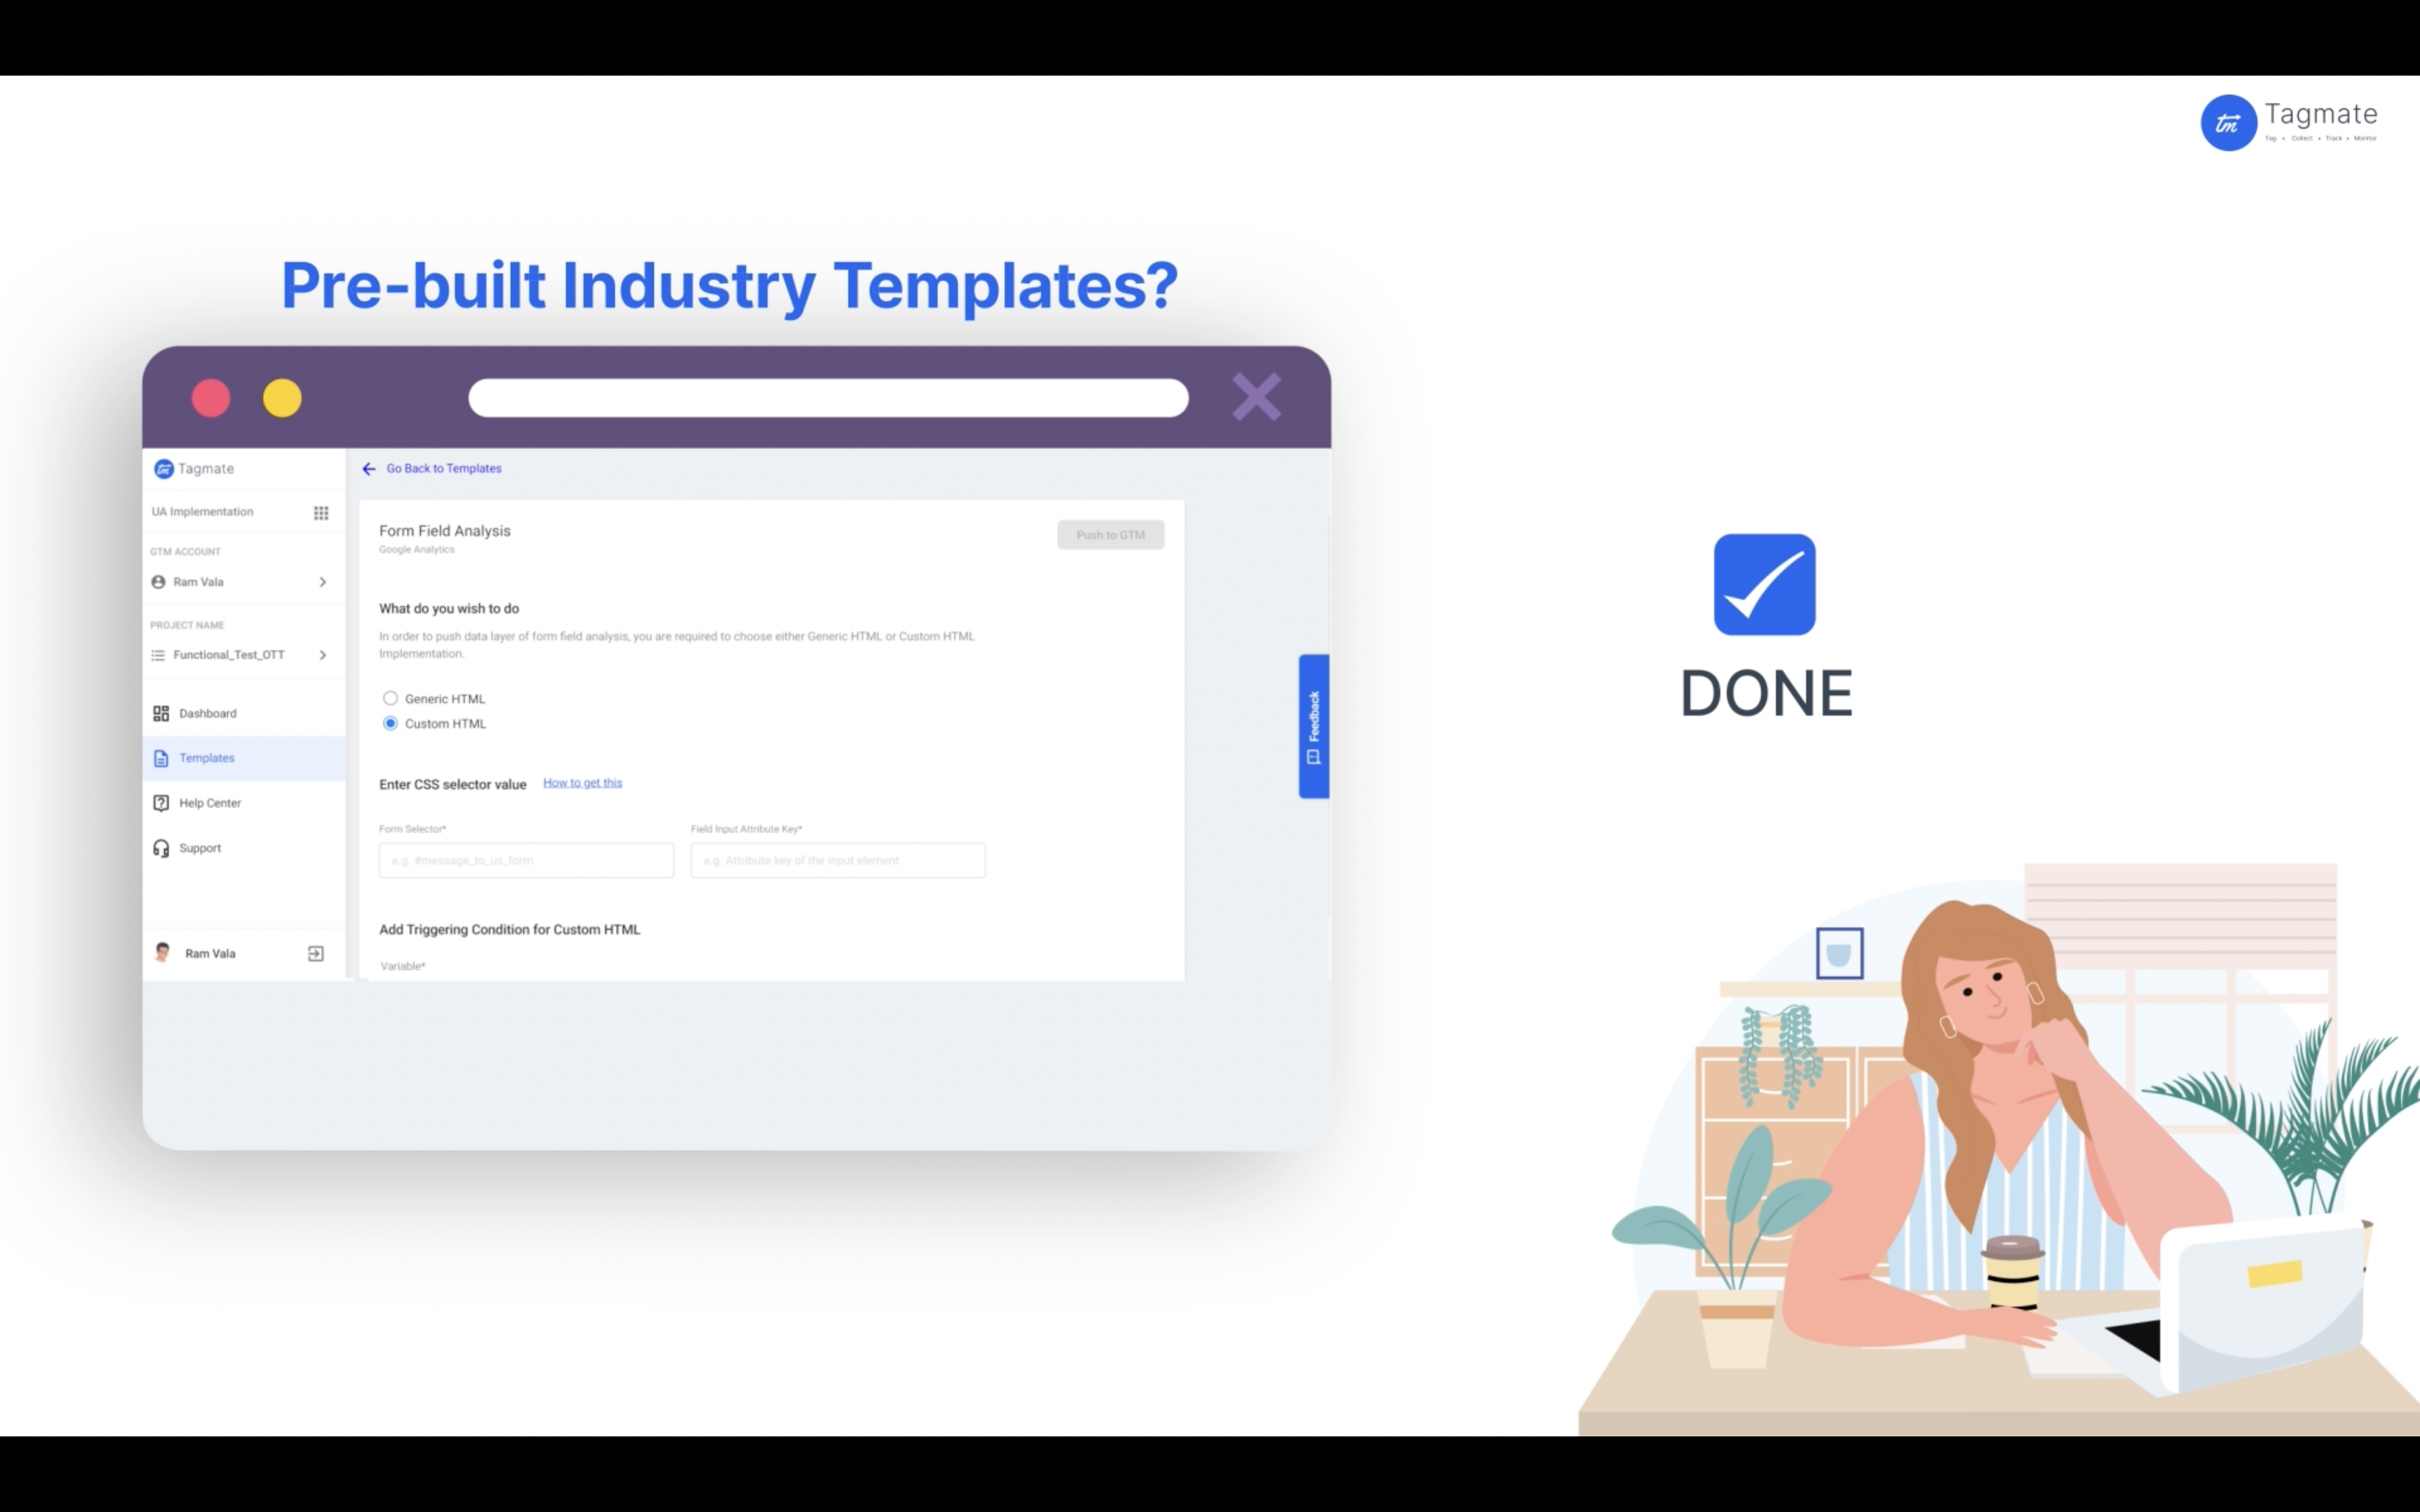 With pre-built Industry templates, Tagmate helps you migrate tags from UA to GA4, and implement fresh marketing and analytics pixels on your website within a few clicks. This happens through pre-built industry templates. Select and implement.